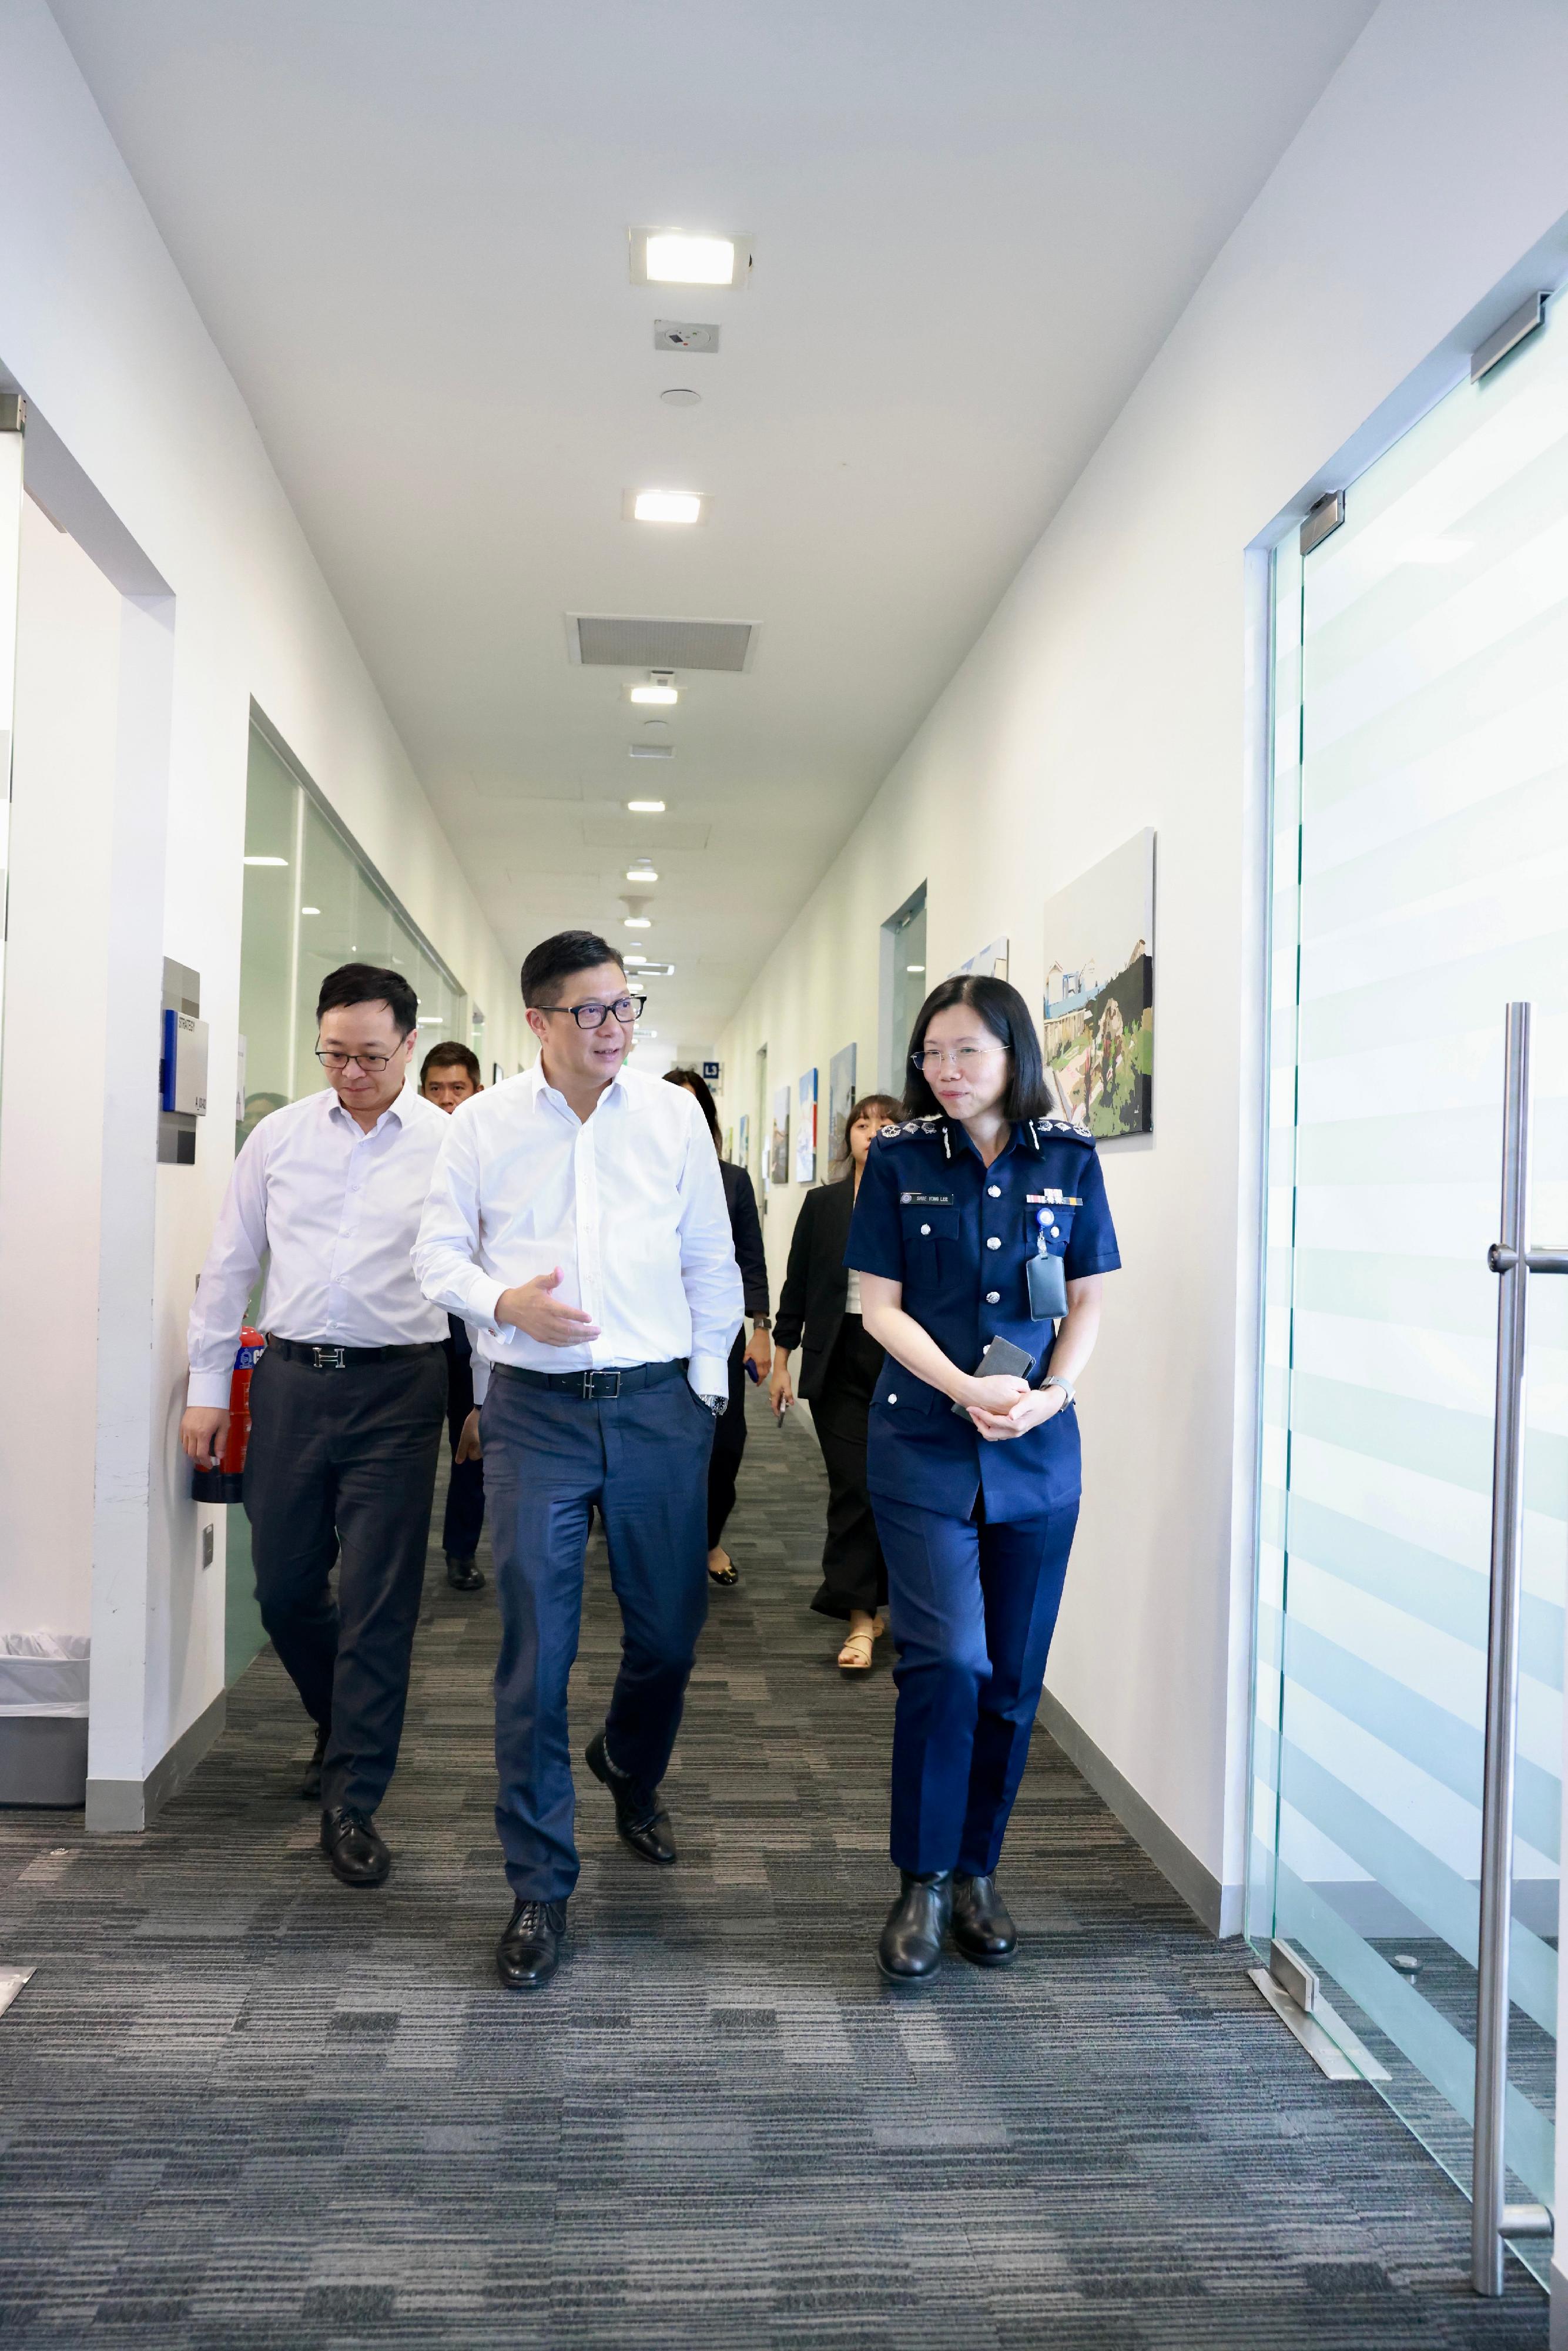 The Secretary for Security, Mr Tang Ping-keung, continued his visit programme to Singapore today (August 31). Photo shows Mr Tang (centre) and the Commissioner of Correctional Services, Mr Wong Kwok-hing (left), visiting the Changi Prison Complex in the company of the Commissioner of Prisons, Ms Shie Yong Lee (right).